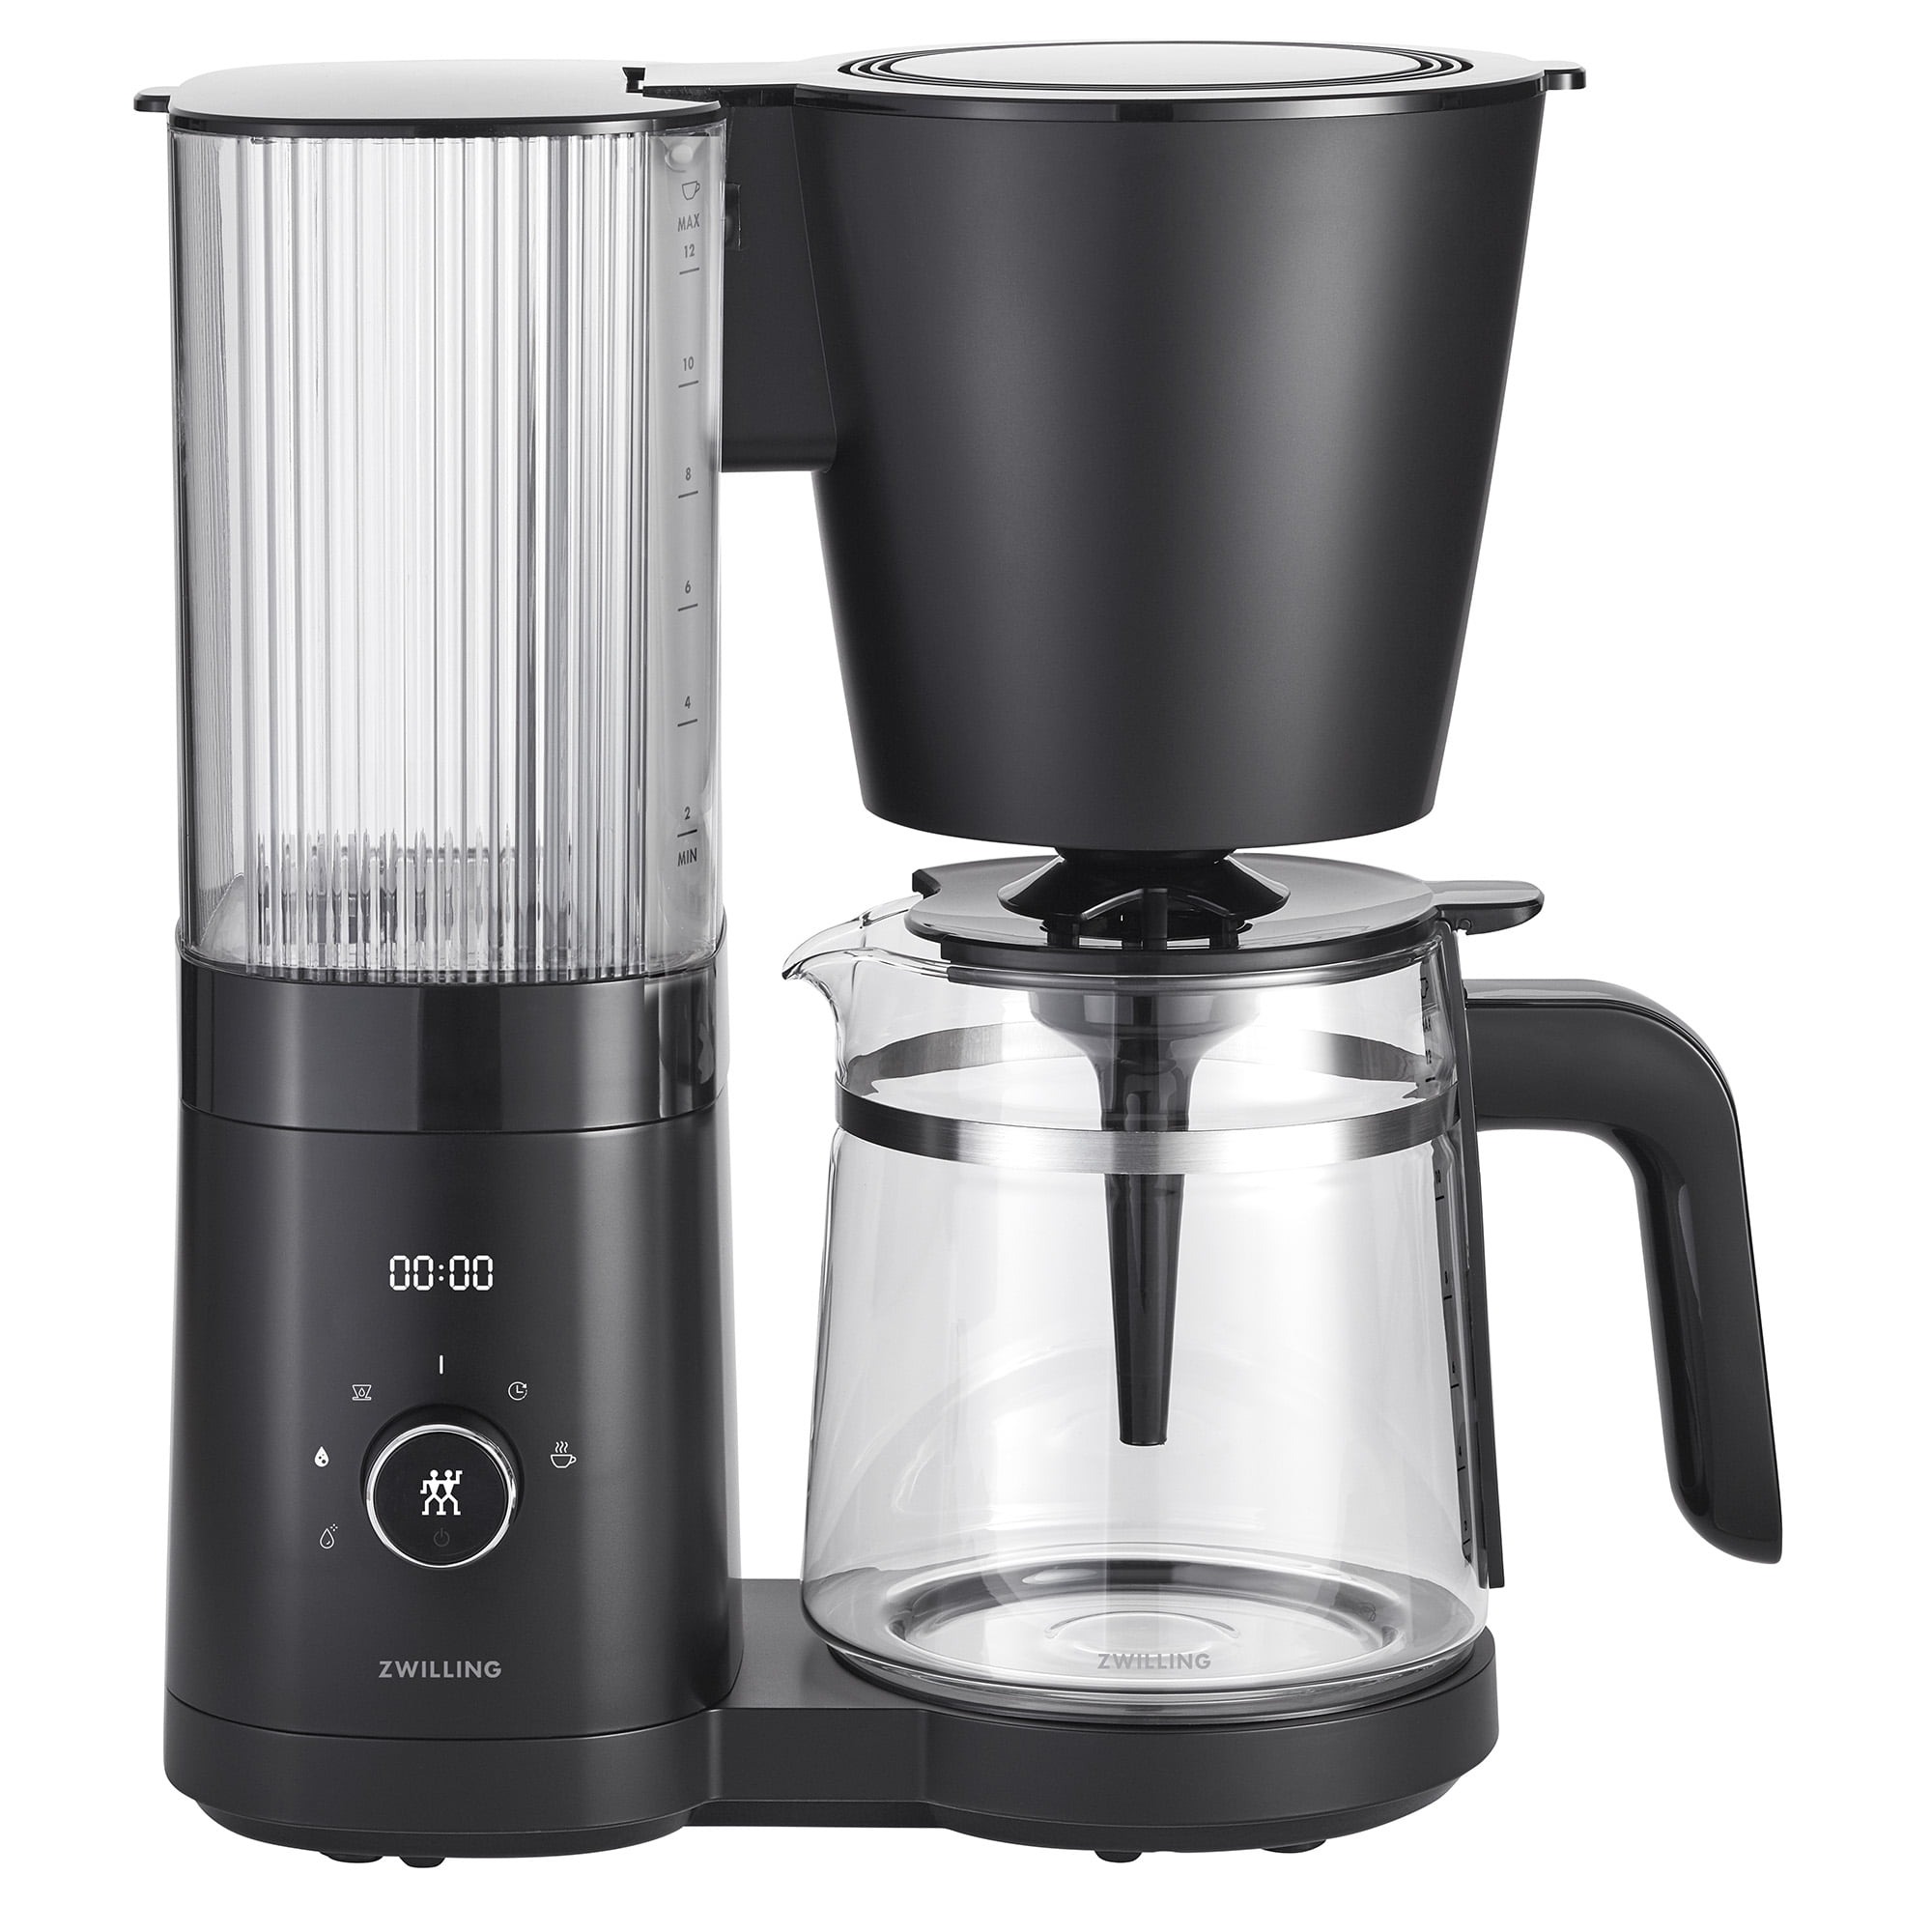  ZWILLING Enfinigy Glass Drip Coffee Maker 12 Cup, Awarded the  SCA Golden Cup Standard, Black: Home & Kitchen